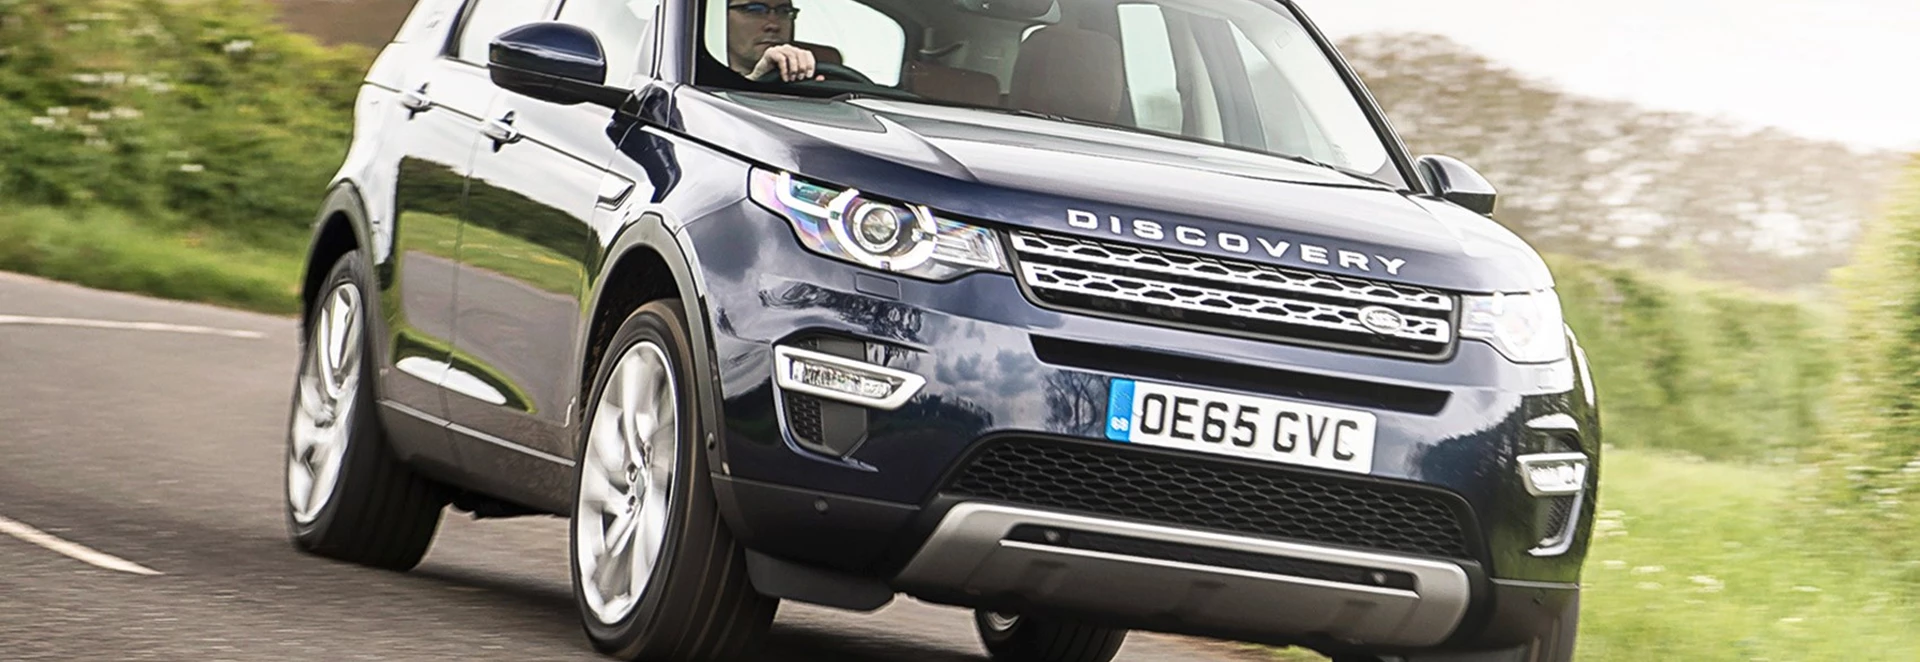 Refreshed Land Rover Discovery Sport adds extra tech